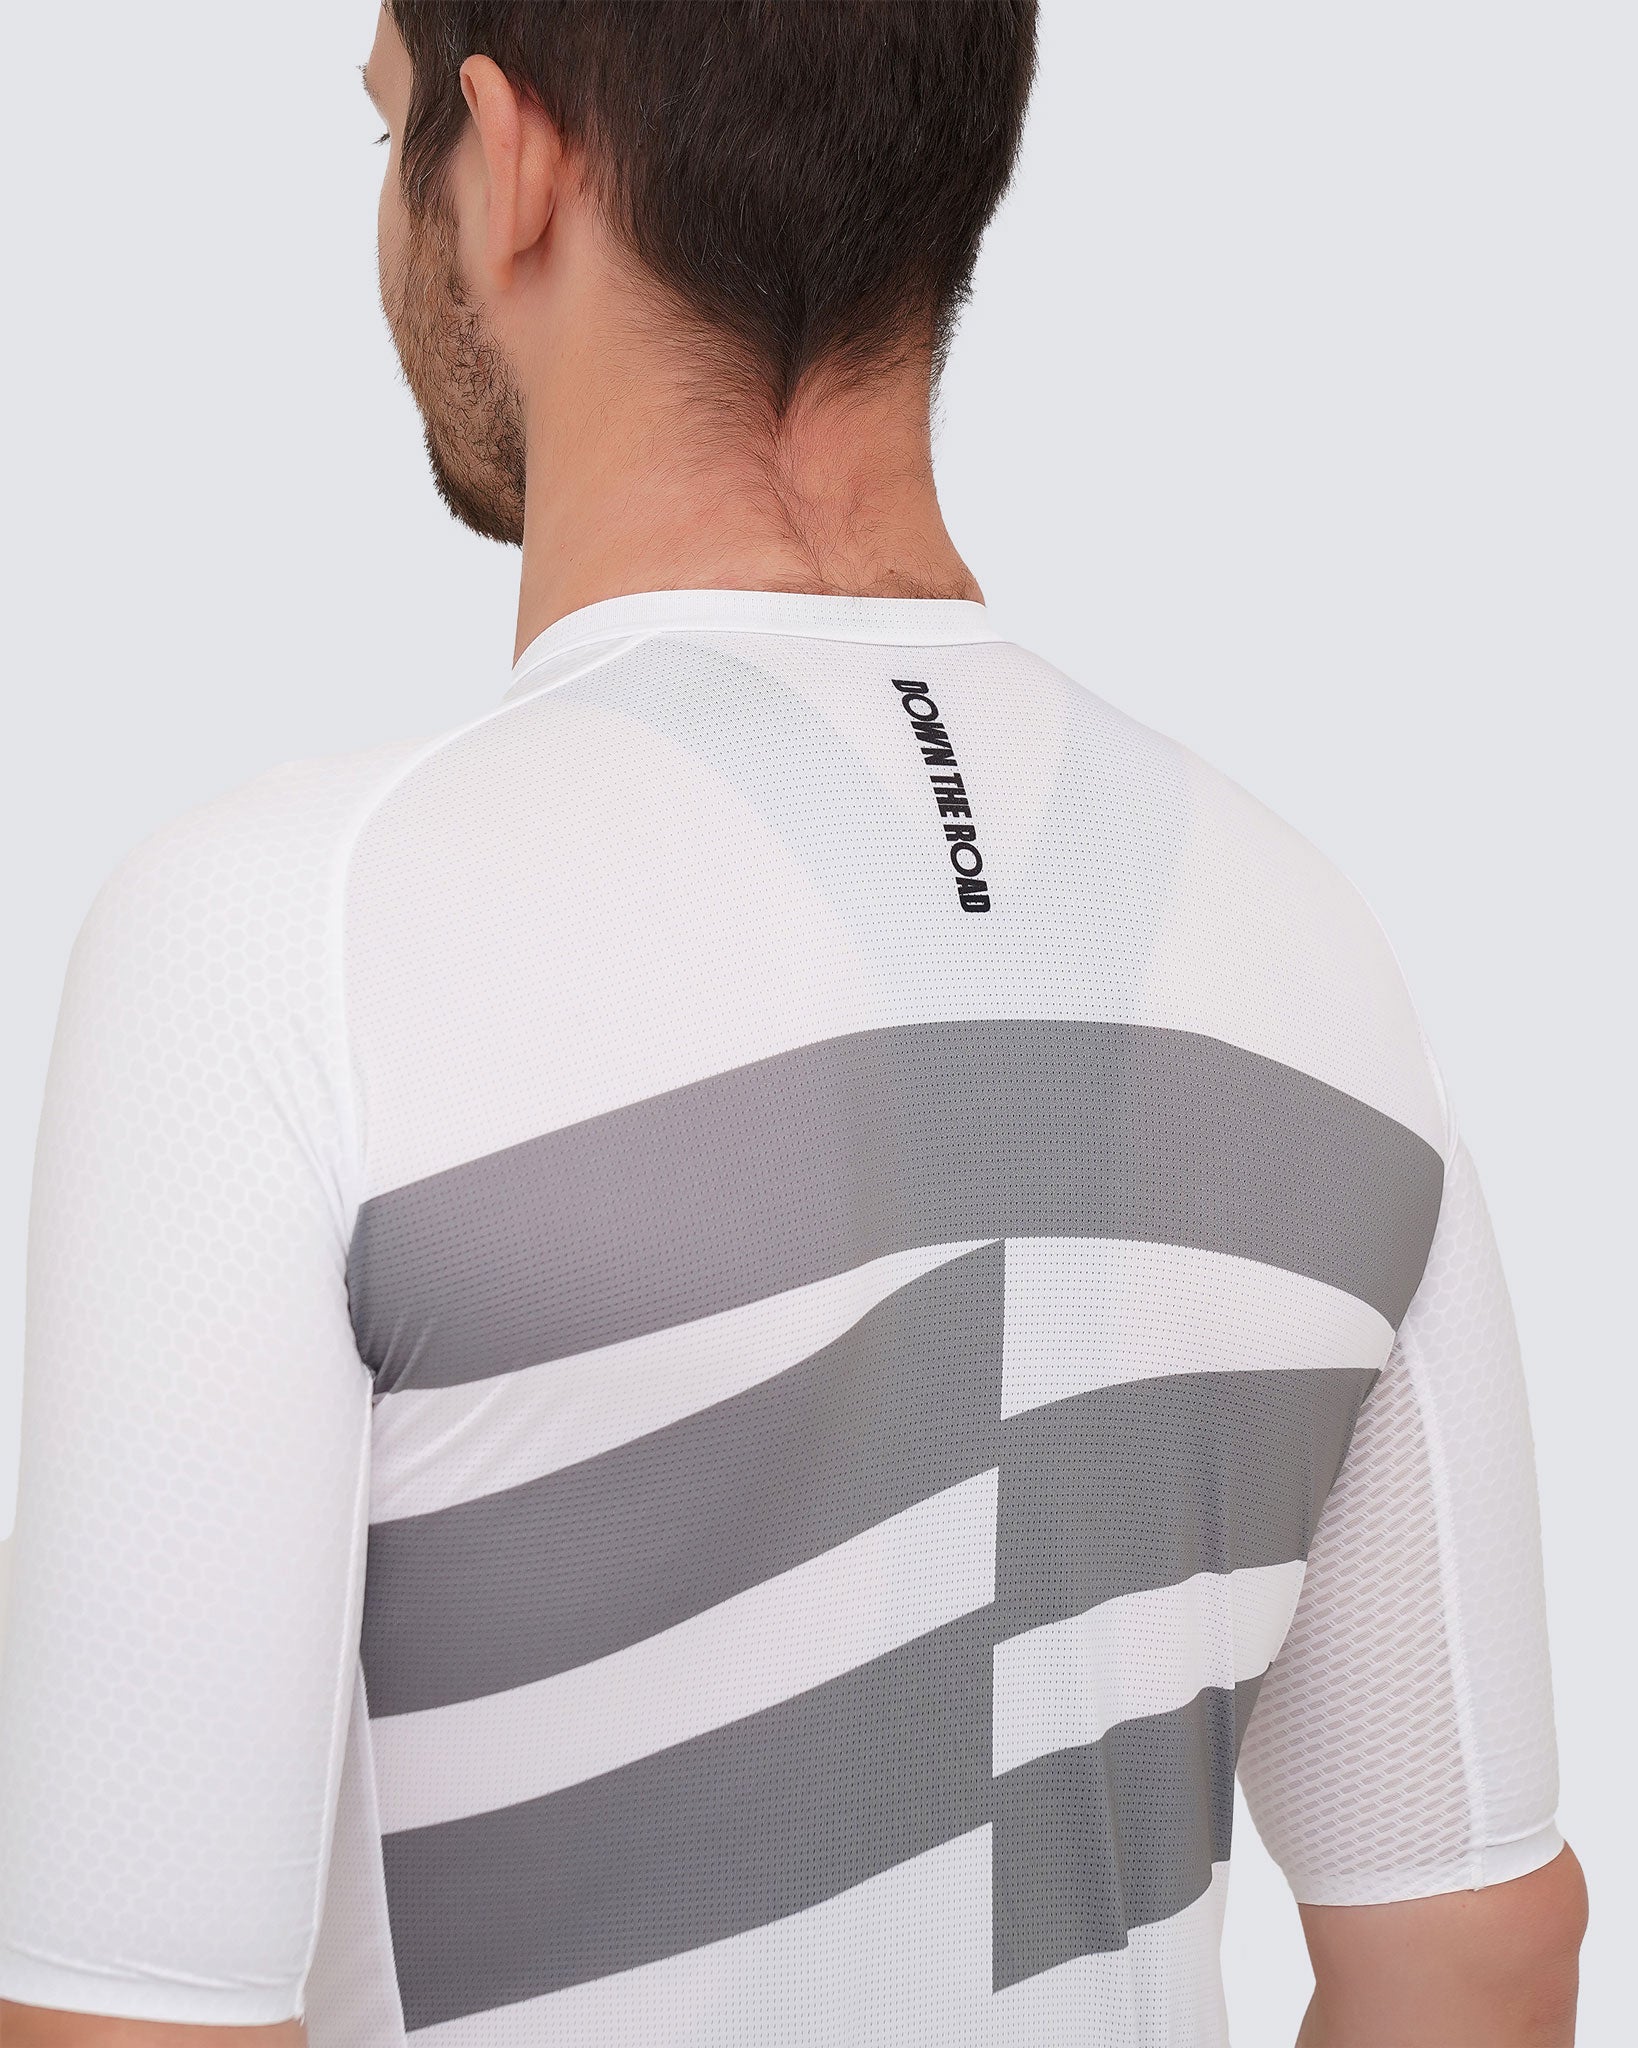 back of white cycling jersey for men